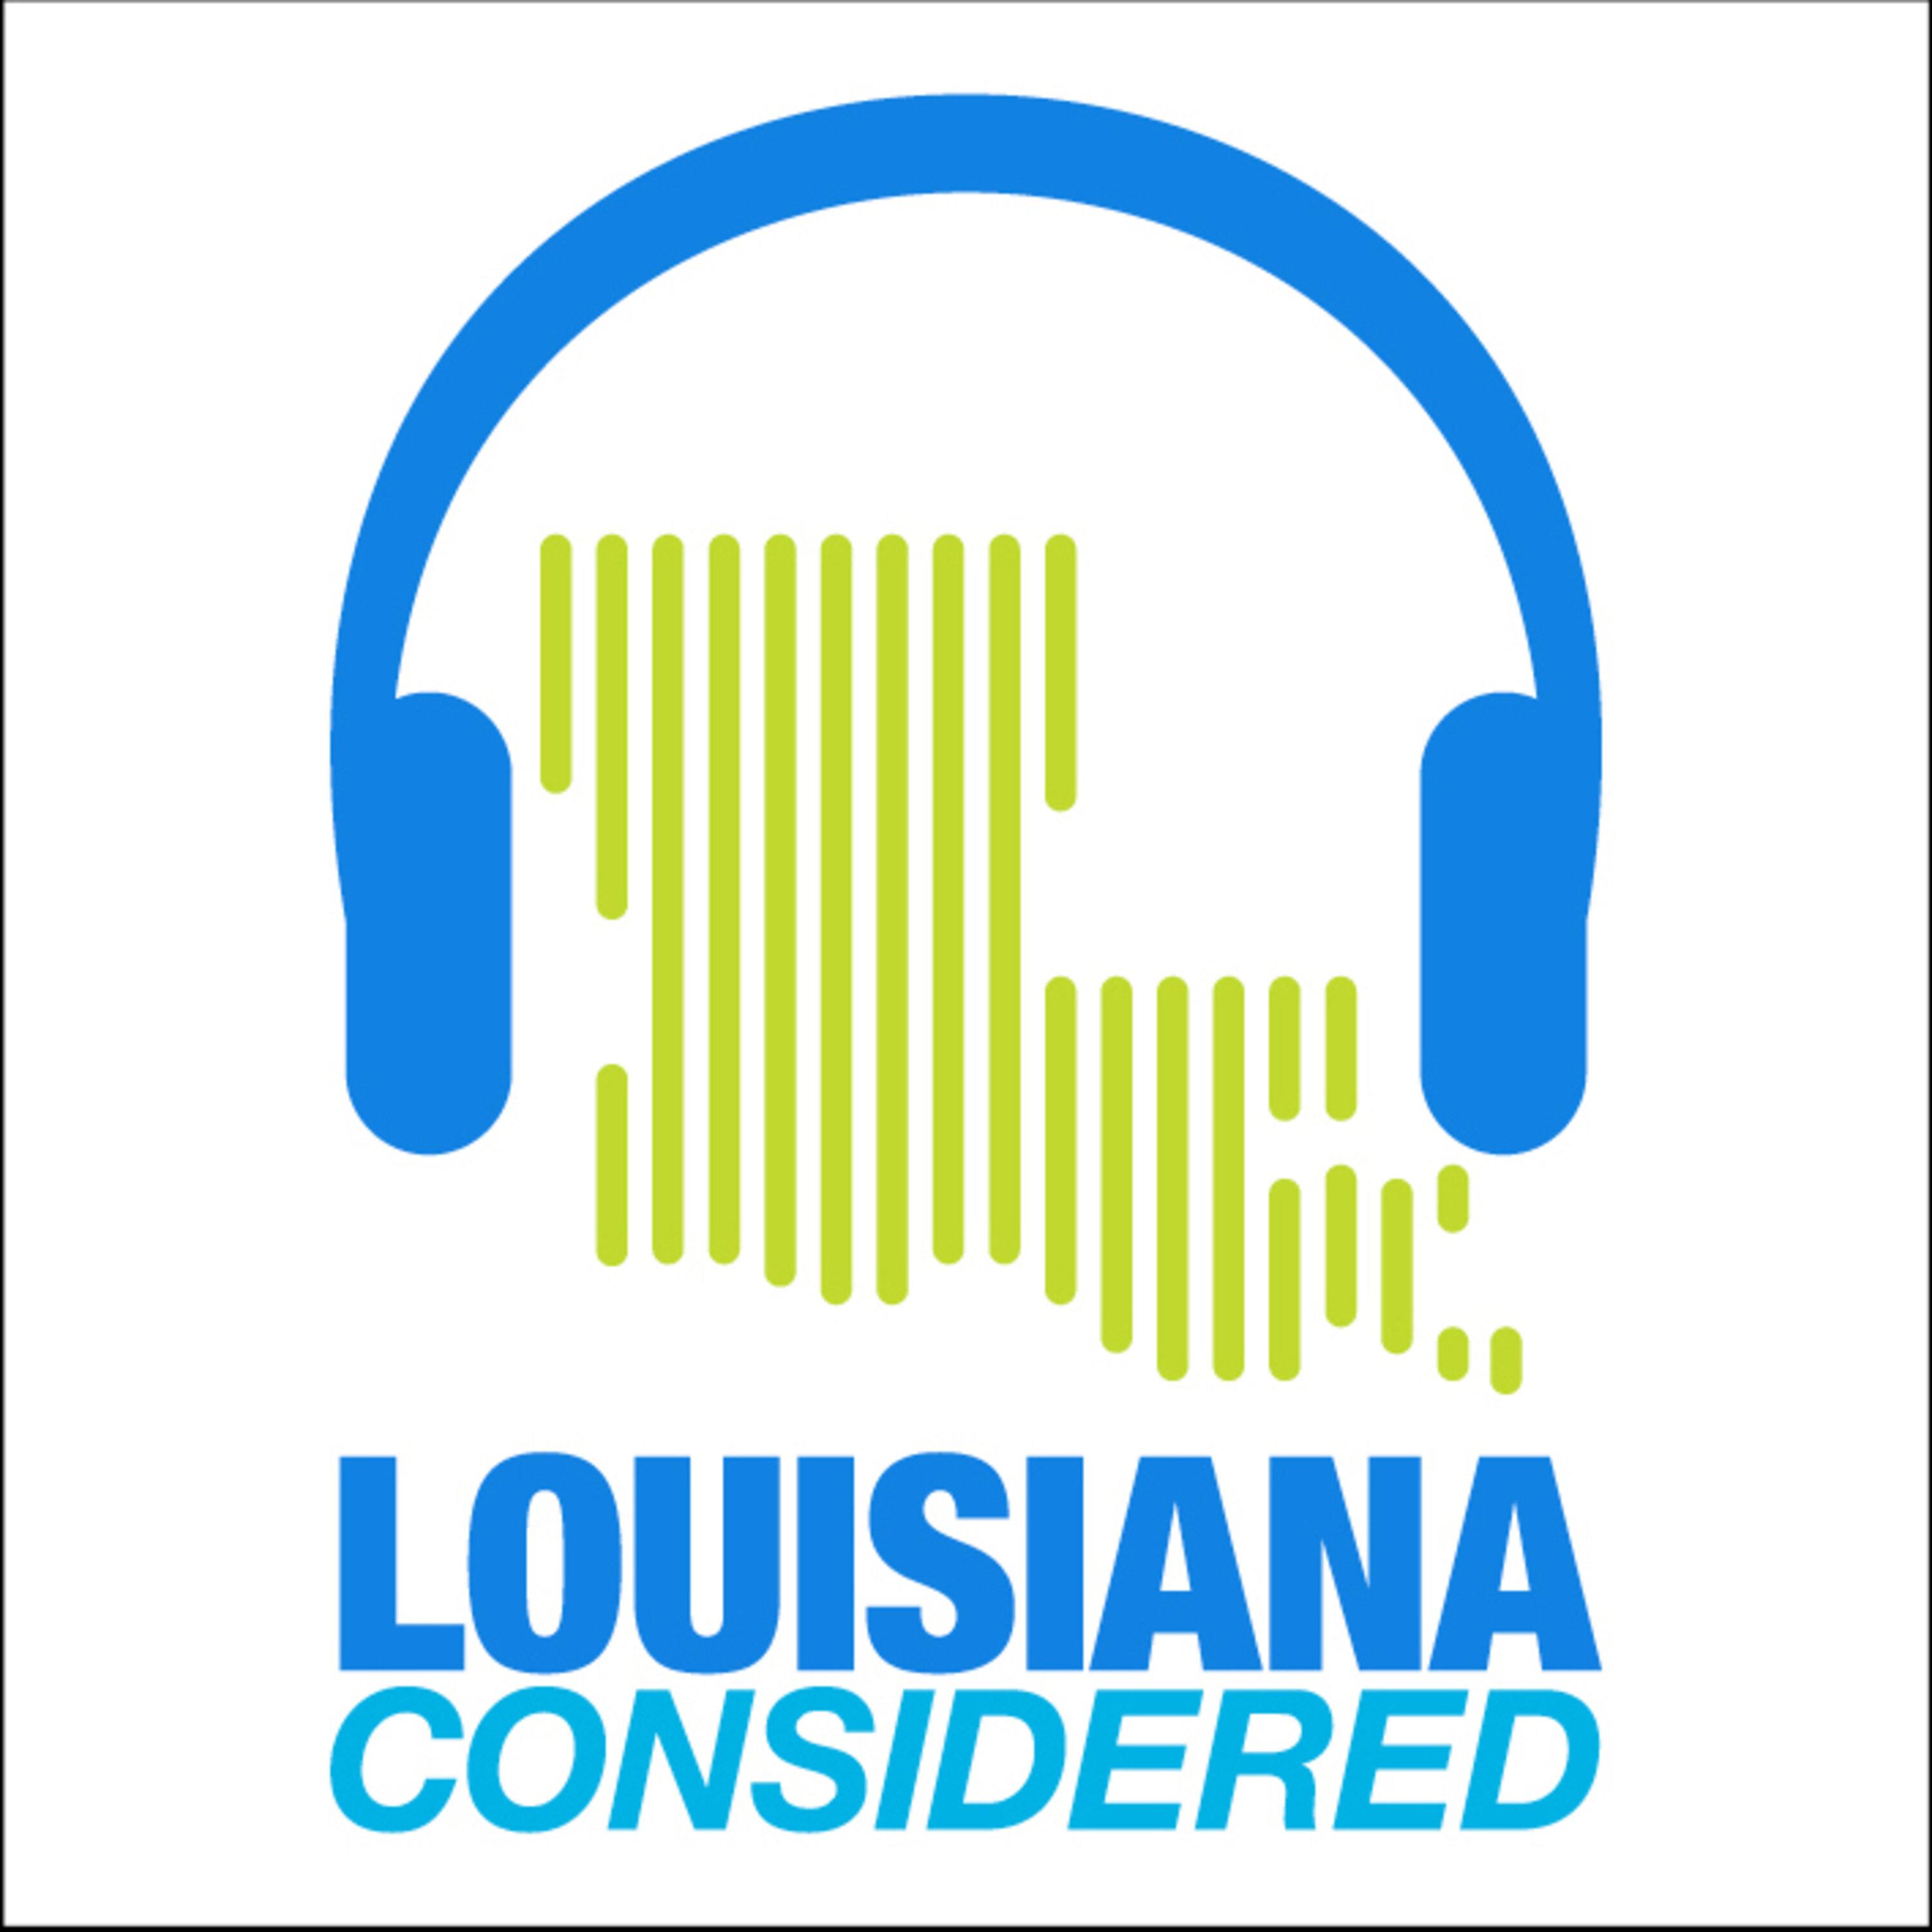 Thumbnail for "Louisiana Considered: How New Orleans residents reacted to an epidemic in 1878".